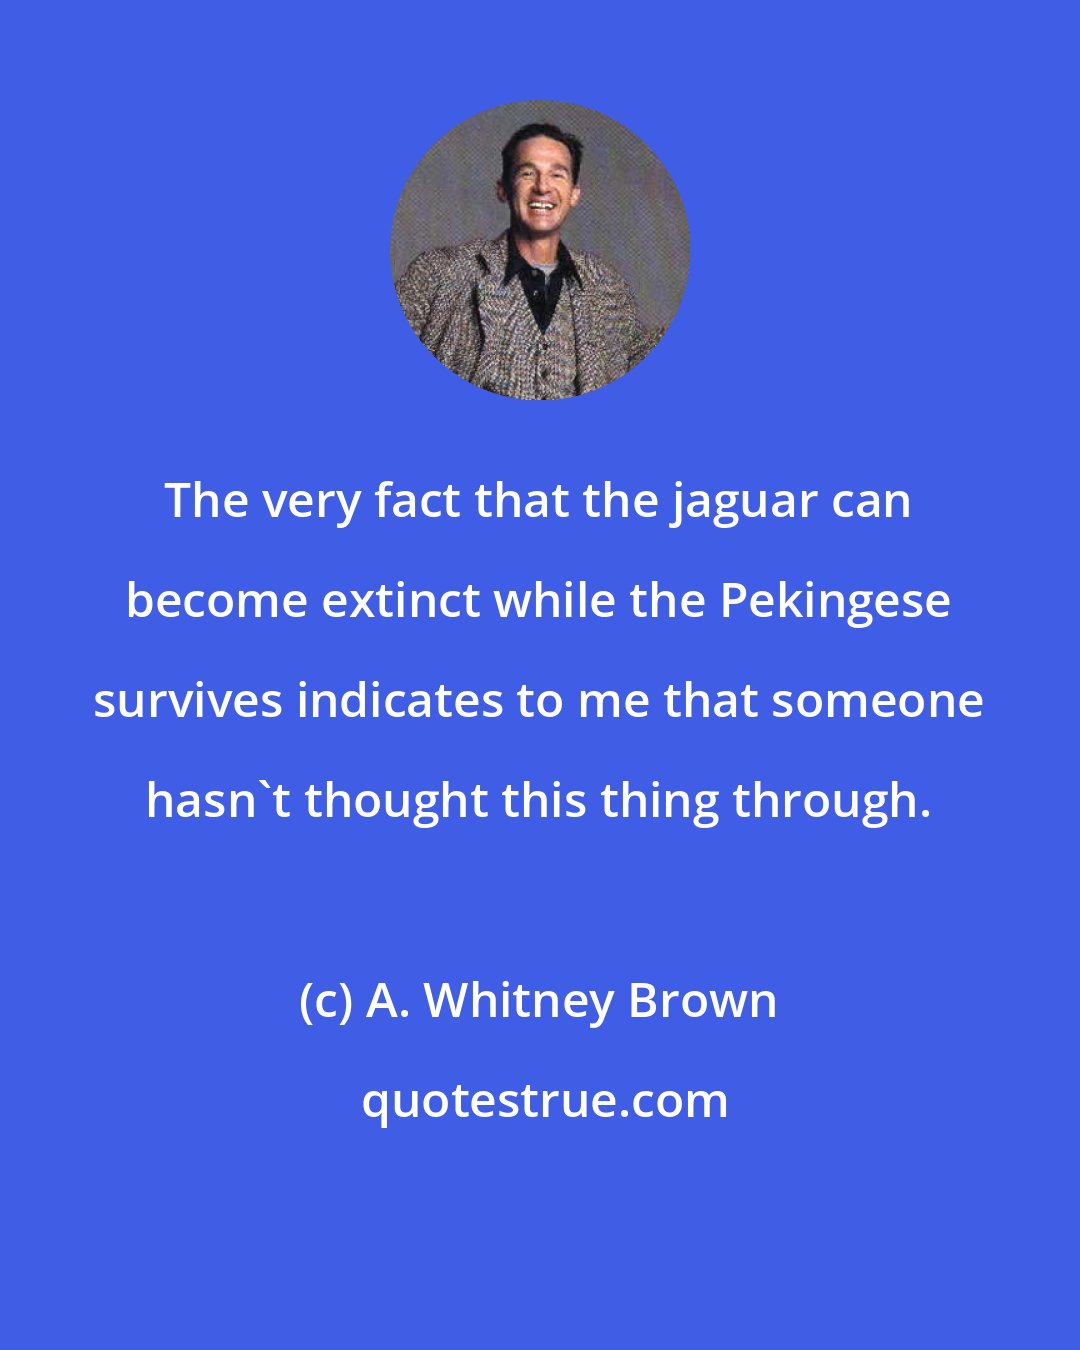 A. Whitney Brown: The very fact that the jaguar can become extinct while the Pekingese survives indicates to me that someone hasn't thought this thing through.